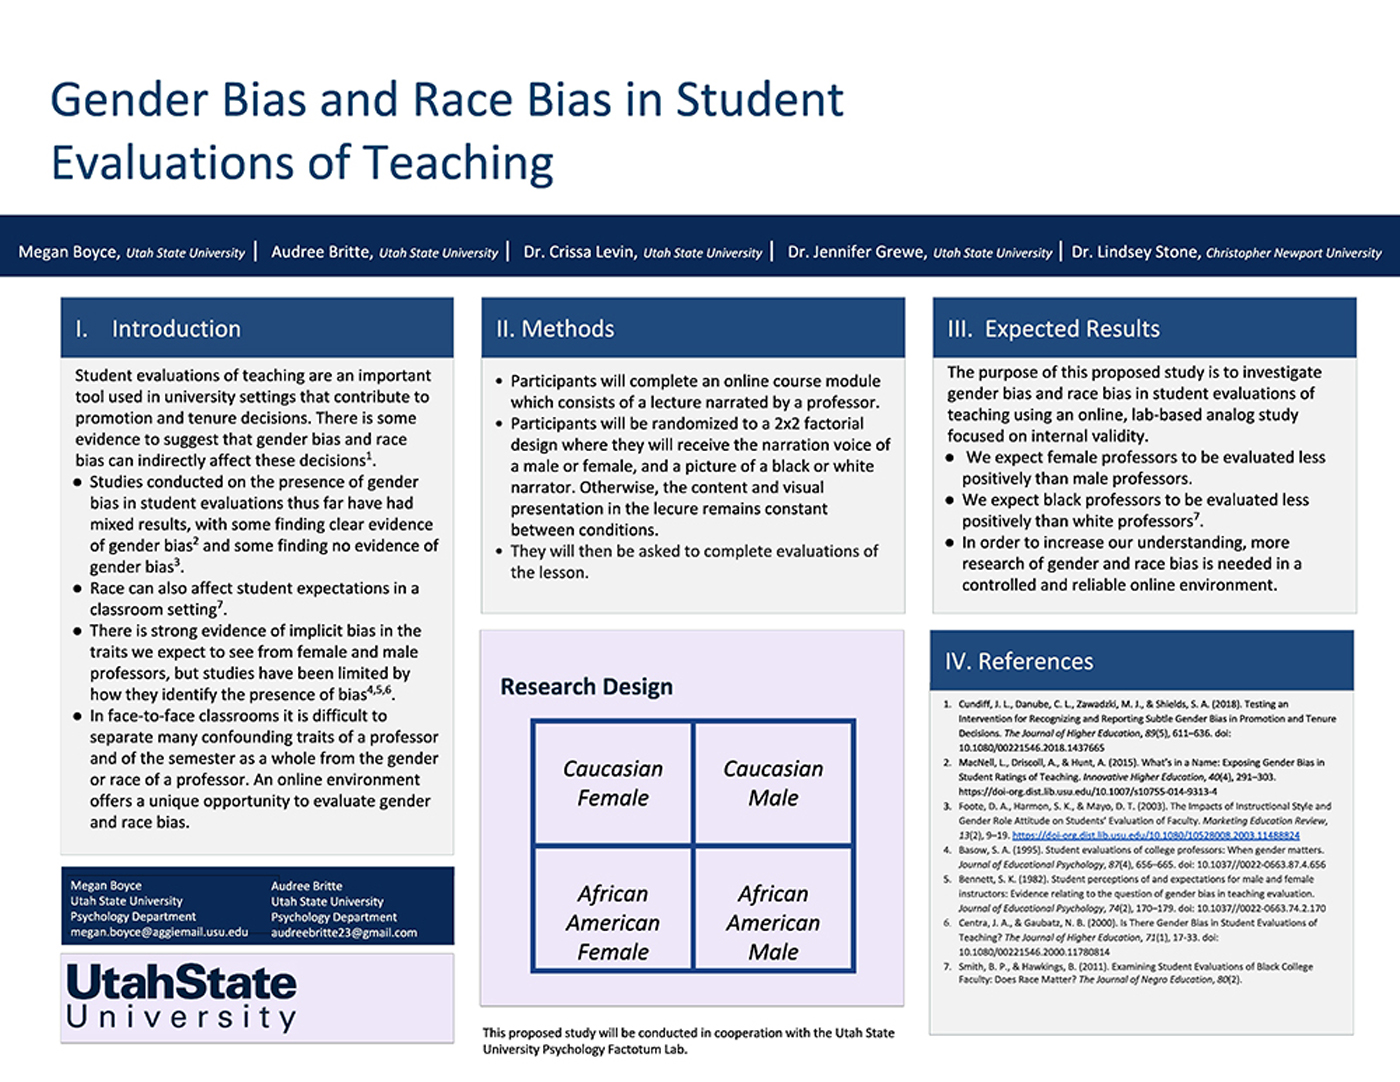 Gender and Race Bias in Student Evaluations of Teaching